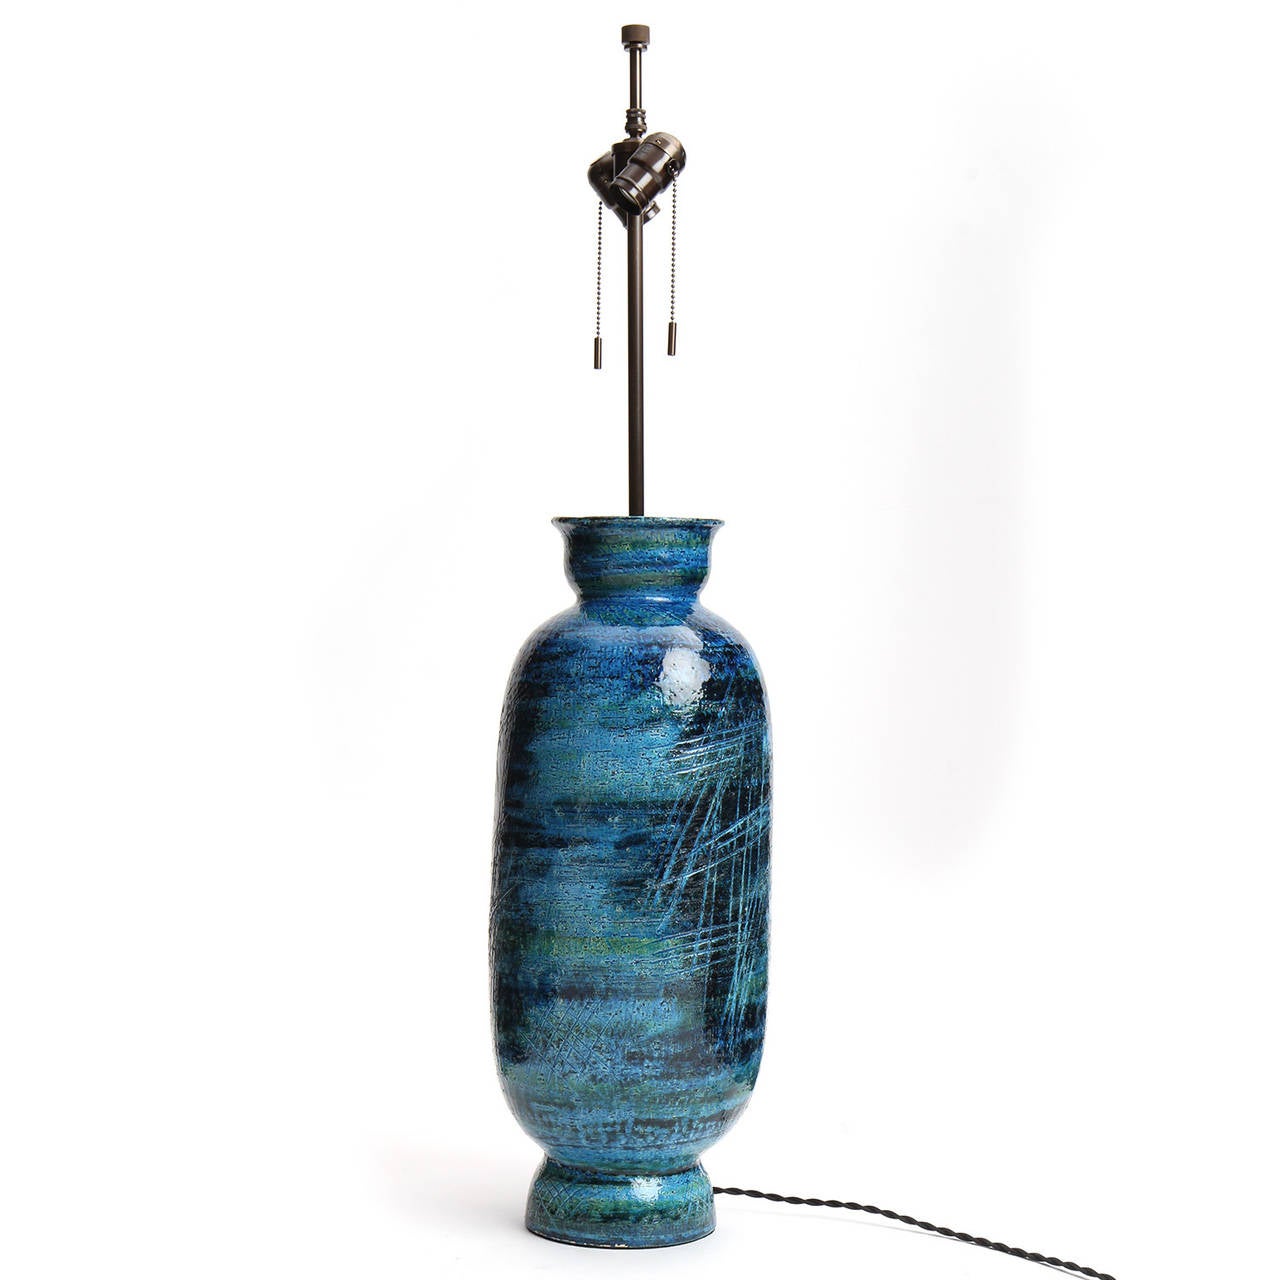 An expressive, well-scaled and beautifully proportioned unique ceramic table lamp having a footed baluster form, incised decoration and covered in a rich variegated deep blue glaze with undertones of green and black.